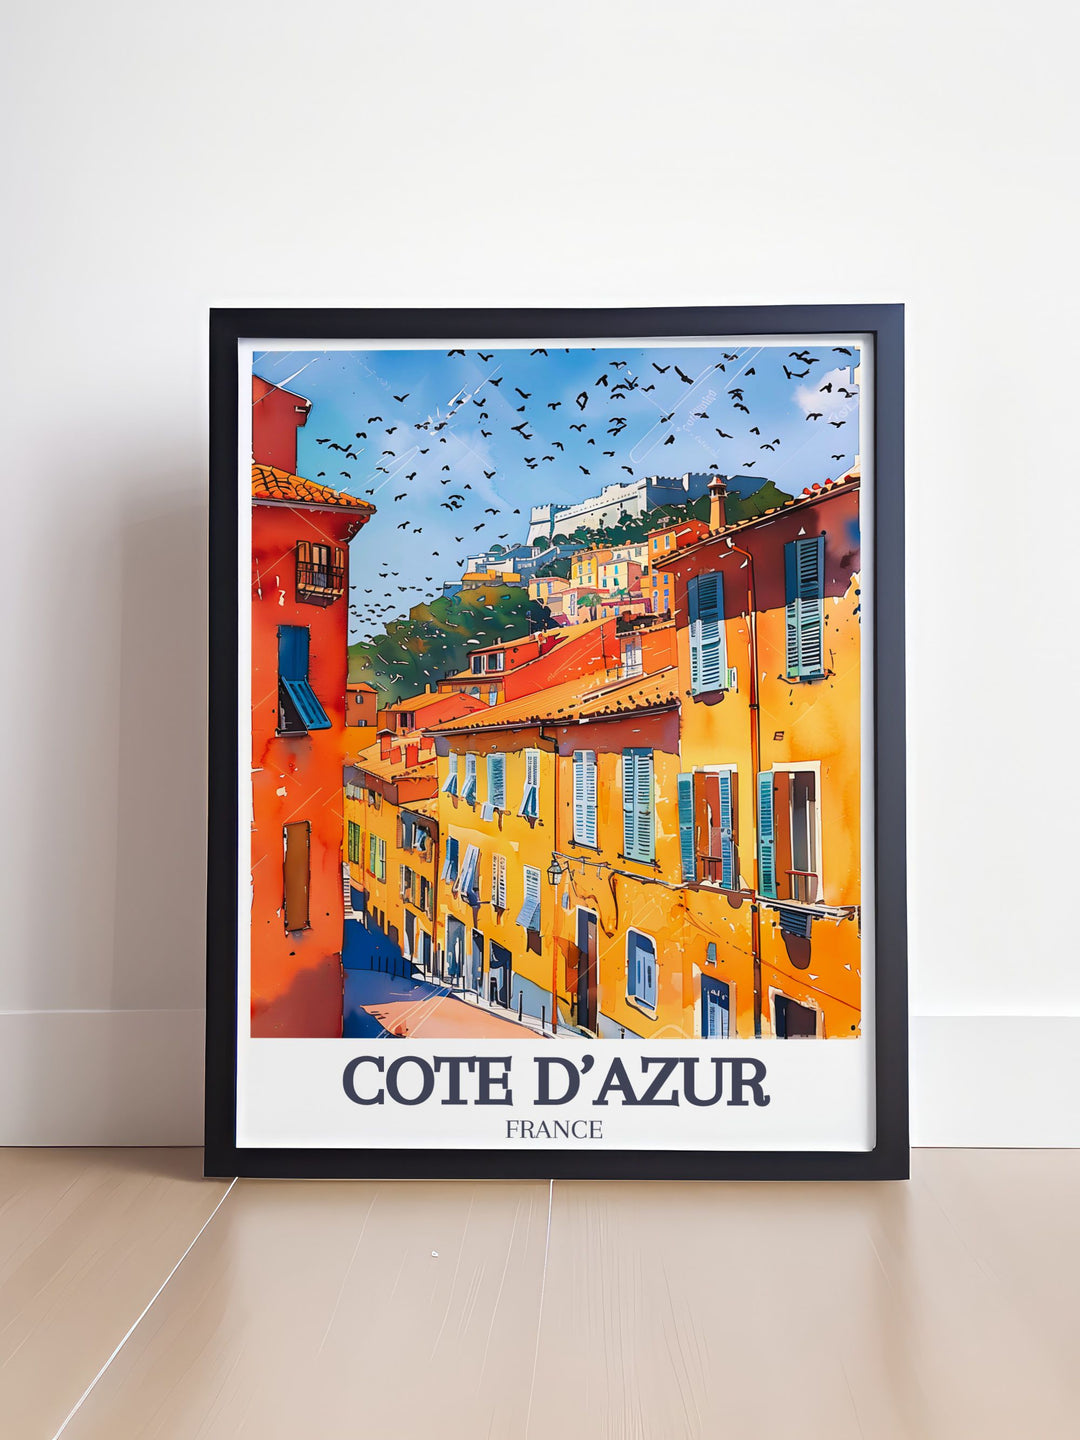 Admire the picturesque streets of Old Town Vieux Nice with this artwork, depicting the districts lively markets and charming buildings, ideal for enhancing any room with the essence of the French Riviera.